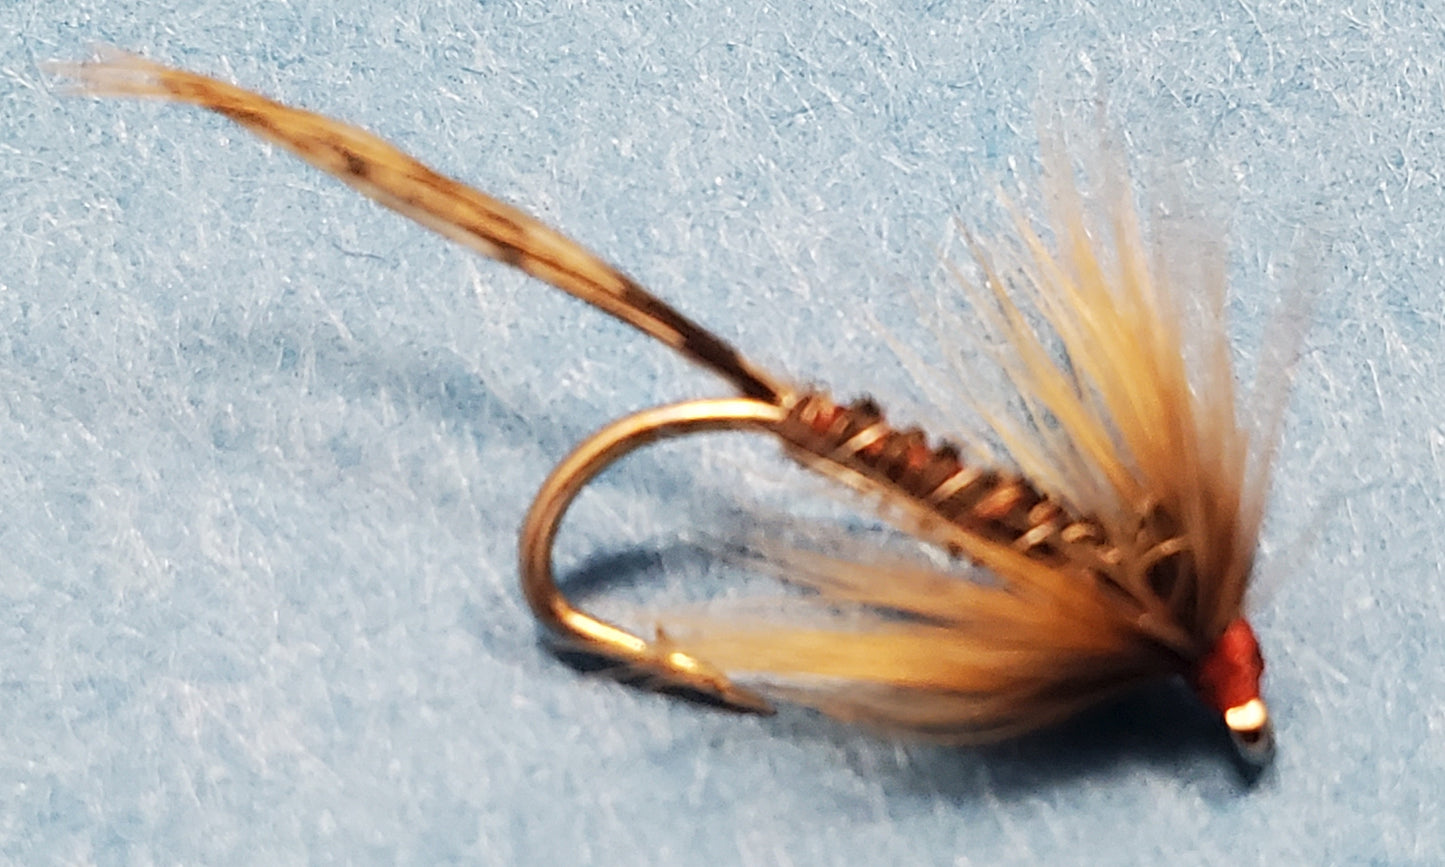 Pheasant Tail Soft Hackle Fly, Soft Hackle Wet Fly